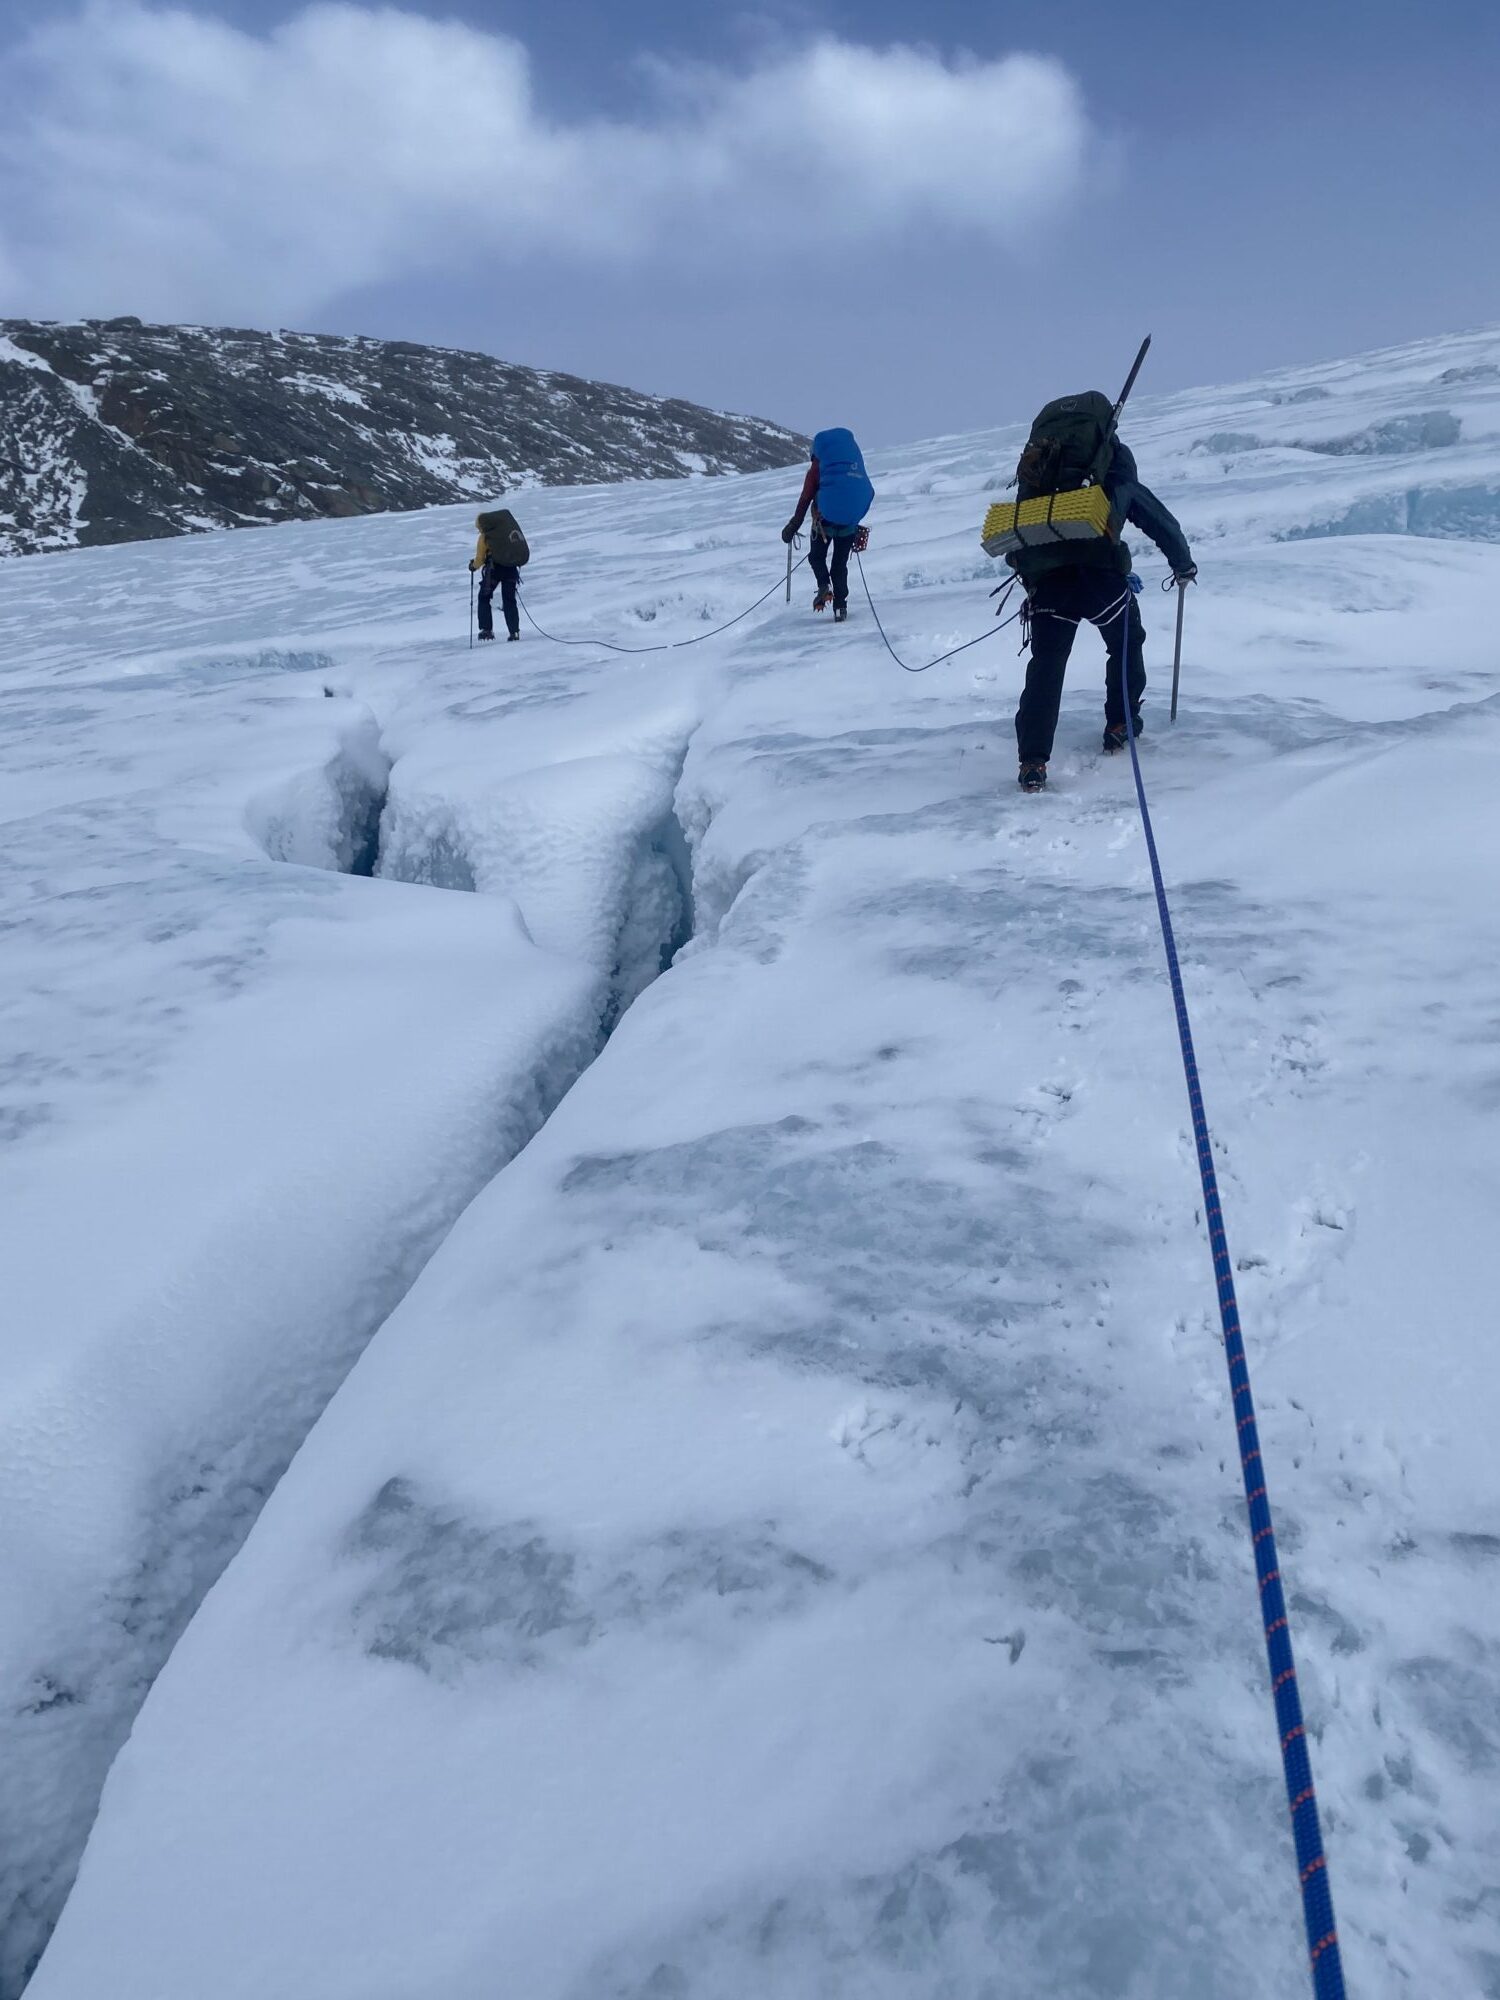 A group of researchers wants to help communities living close to melting glaciers. Photos shows the group walking on a glacier.